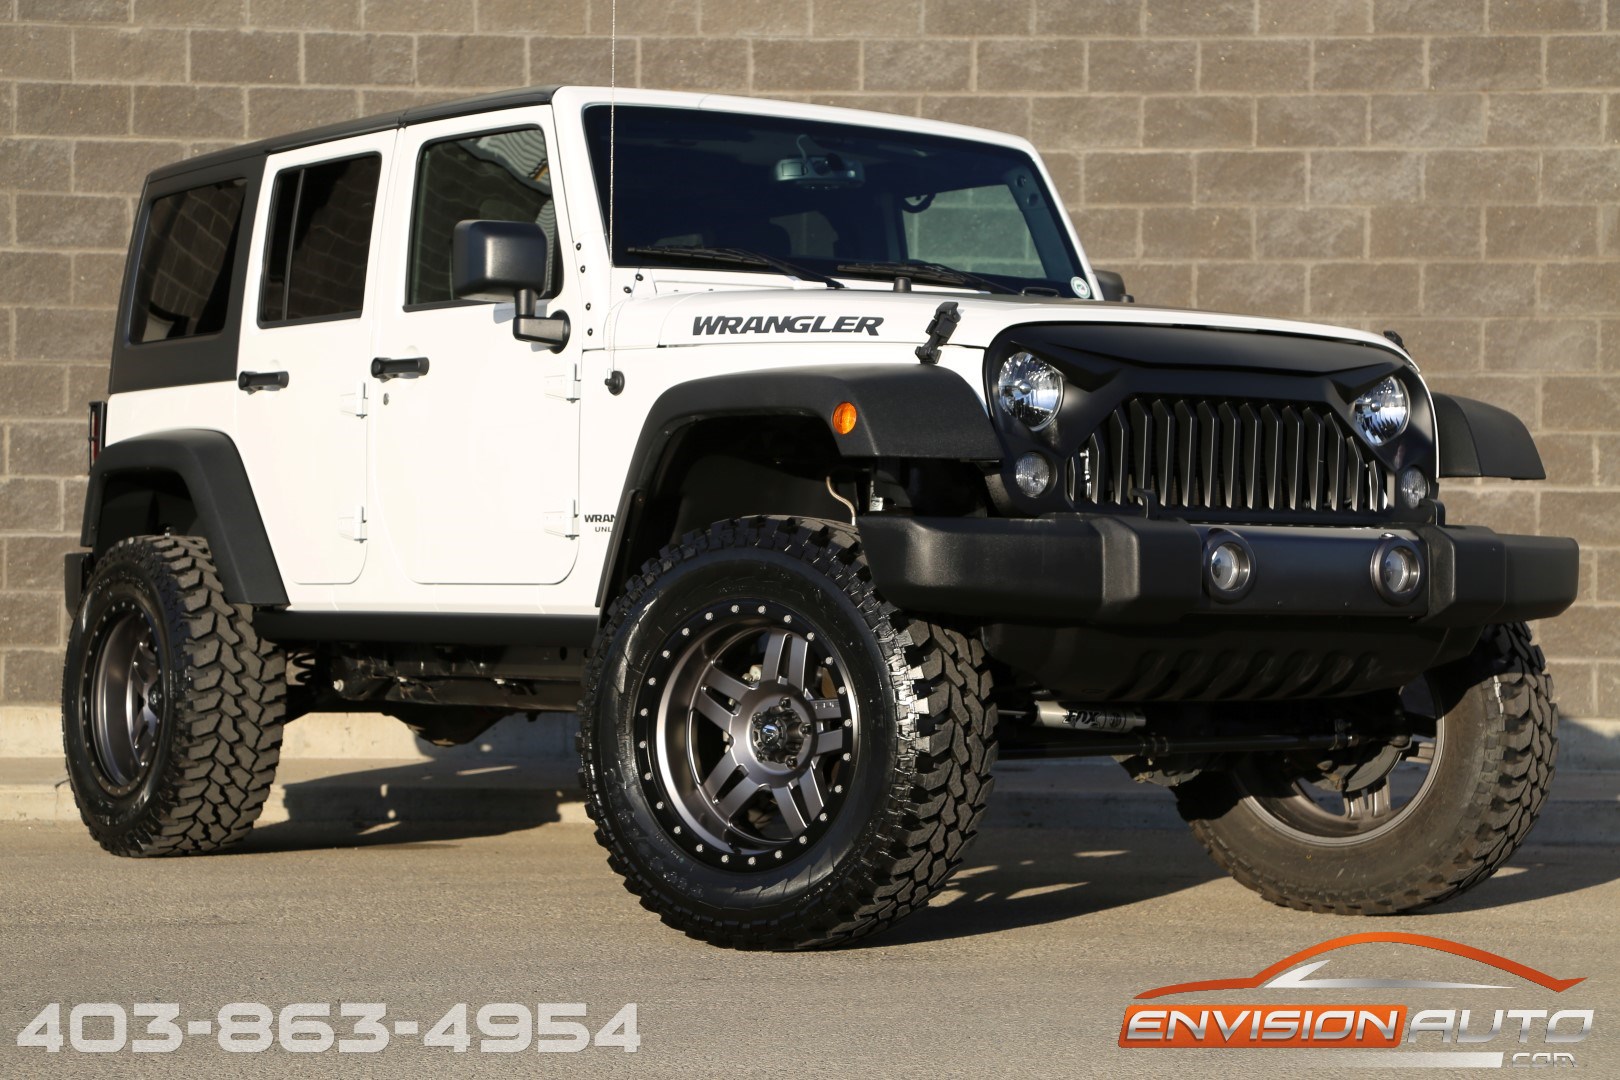 2017 JEEP WRANGLER UNLIMITED JK \ BIG BEAR EDITION \ 4IN LIFT \ FOX SHOCKS  \ VADAR GRILLE - Envision Auto